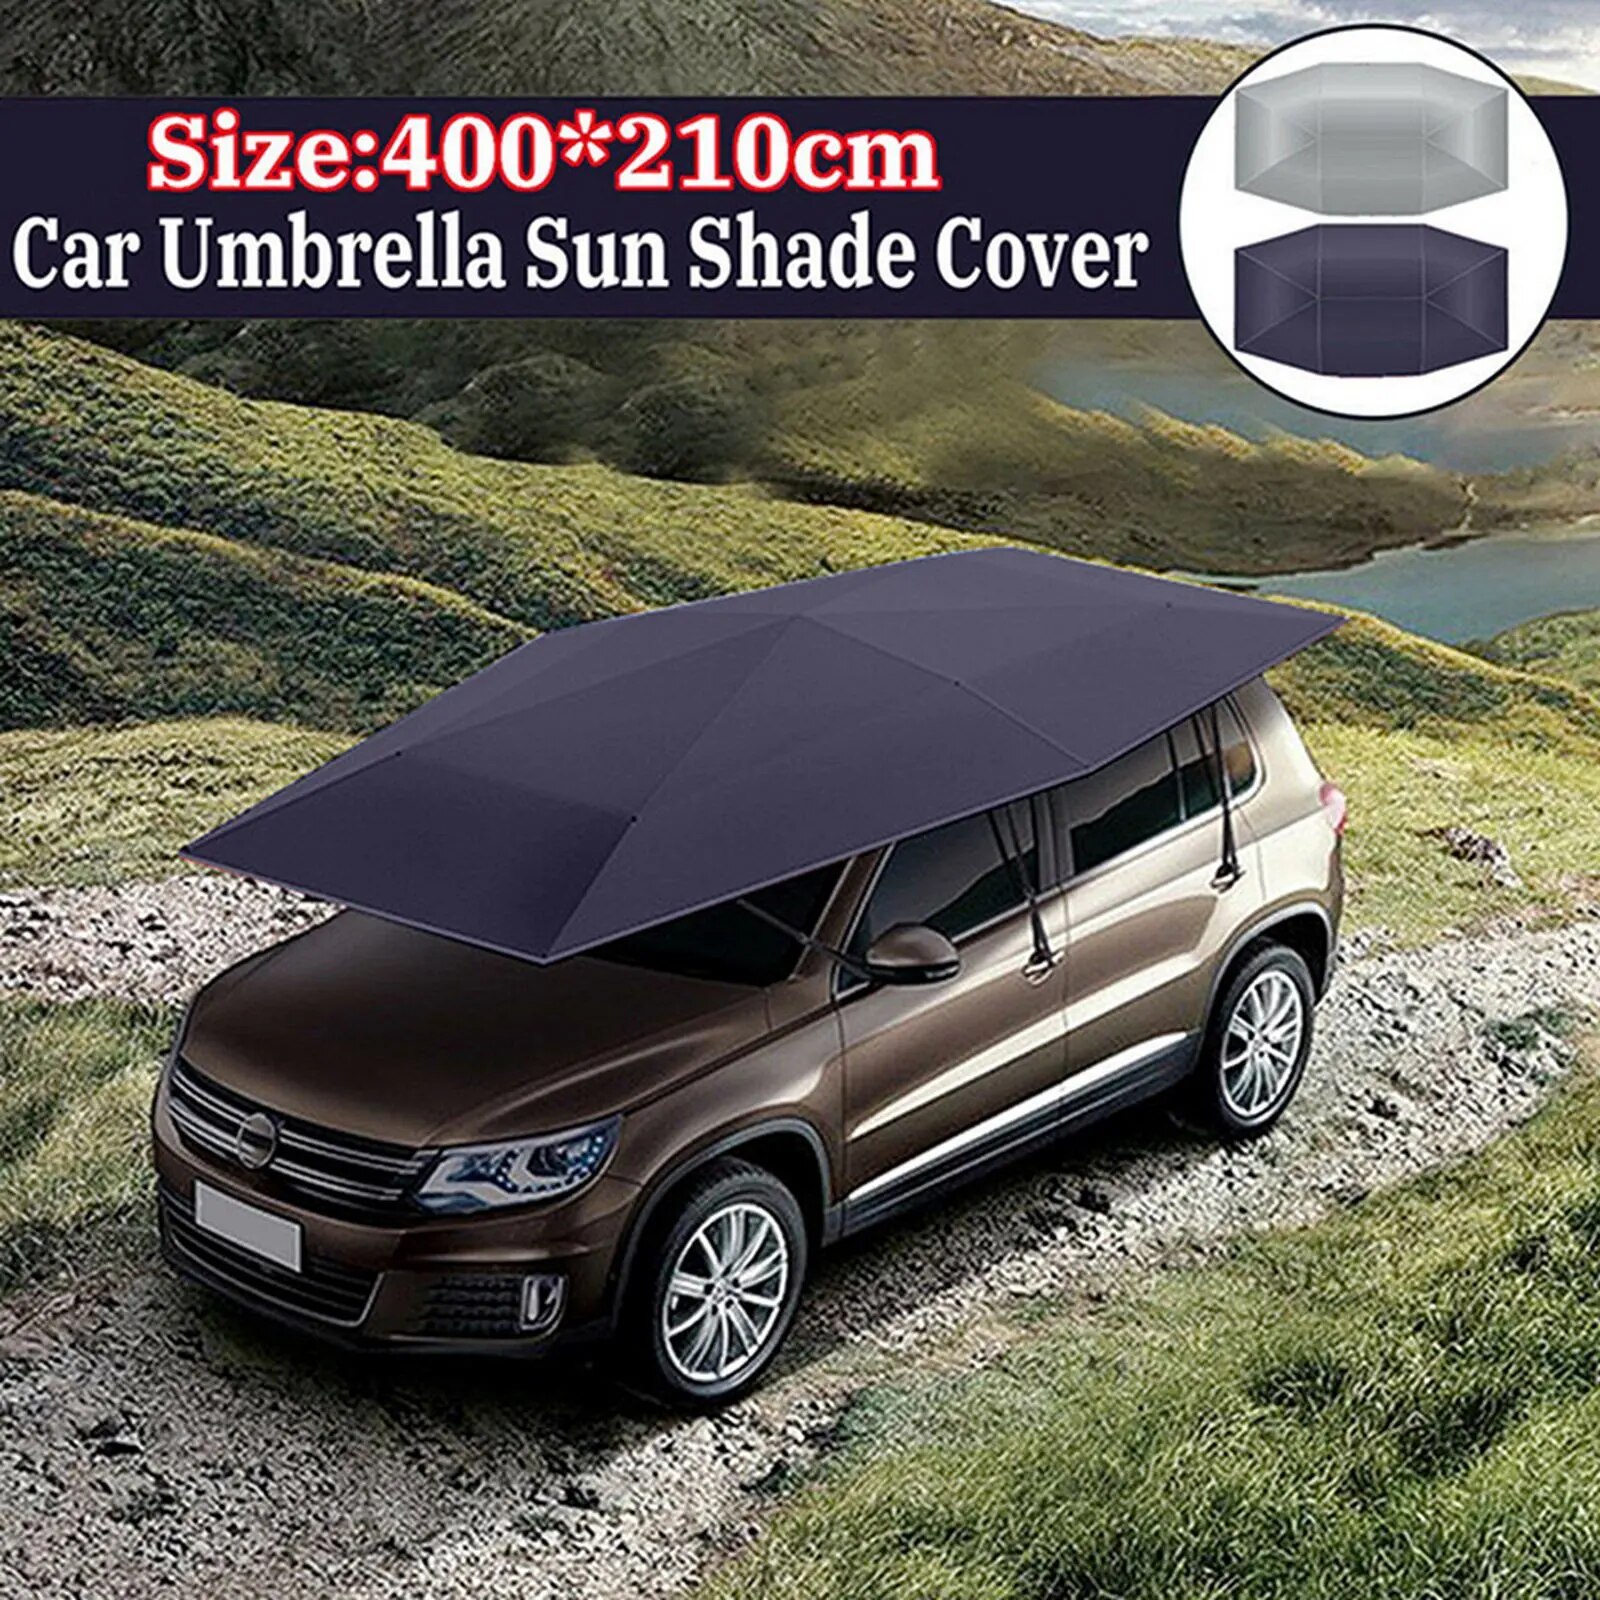 Car Summer Sunshade Umbrella Portable Anti-UV Protection Roof Cover Summer Sunscreen Shed 400*210cm